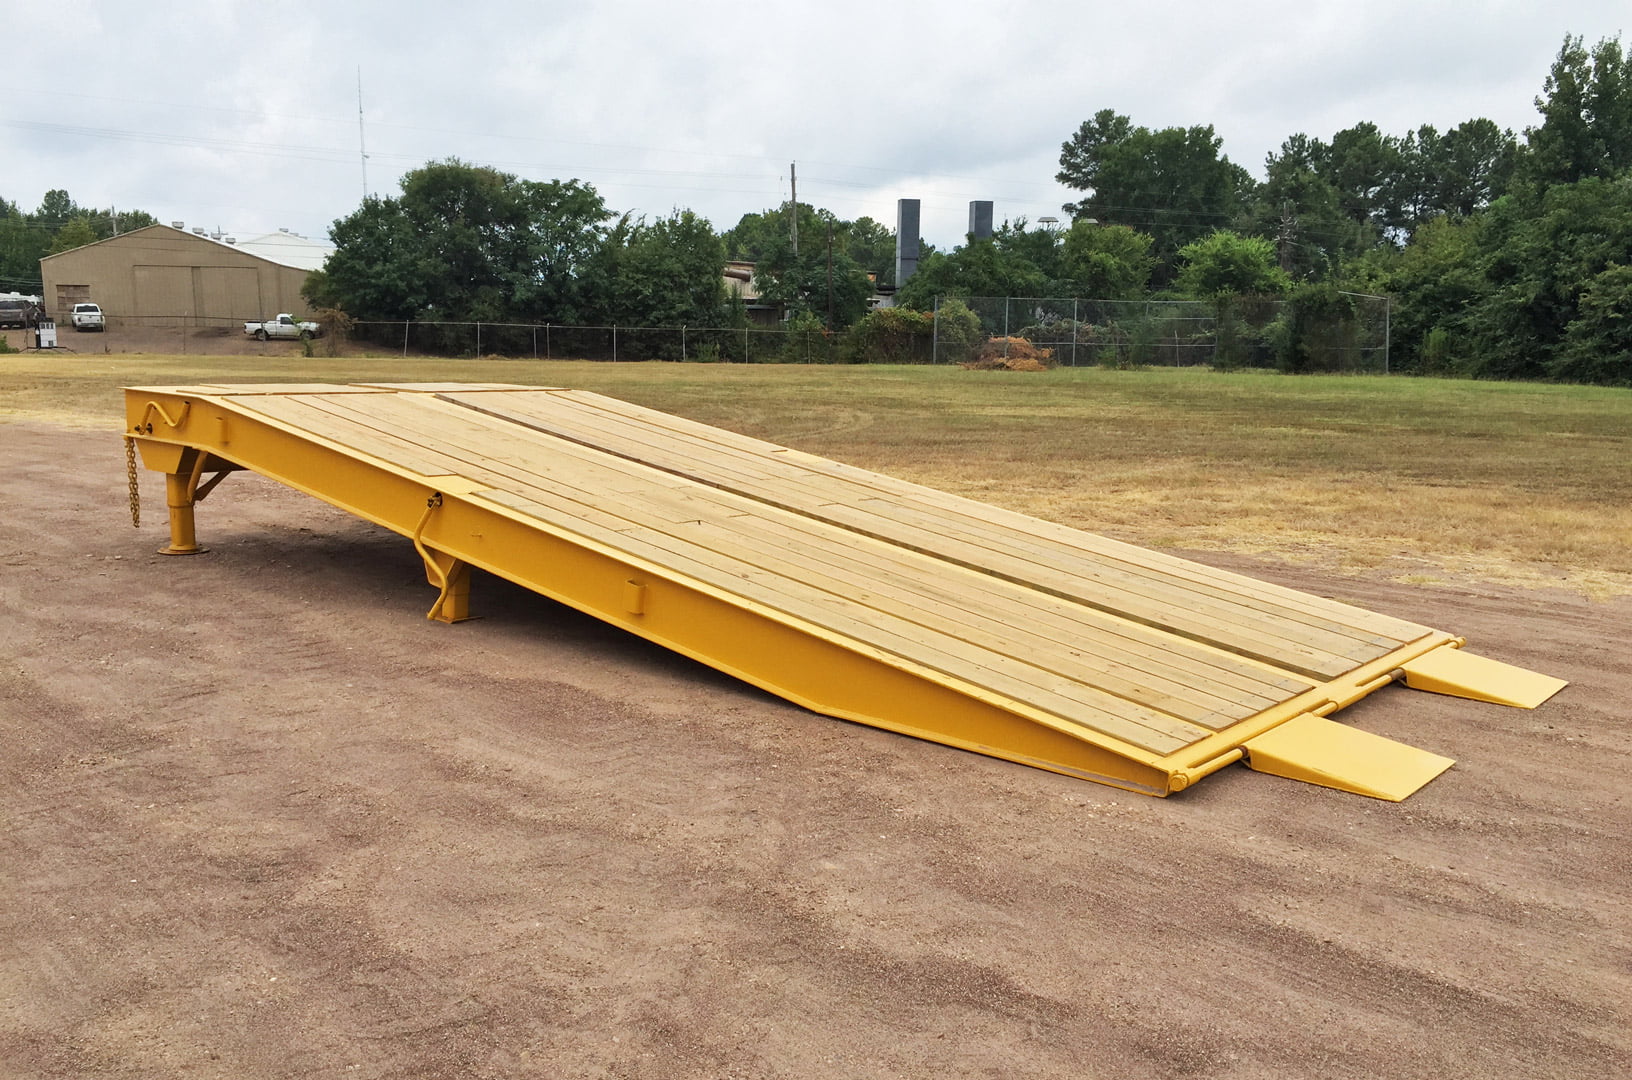 Portable Loading Ramps for sale - Quality loading ramps manufactured by Ledwell